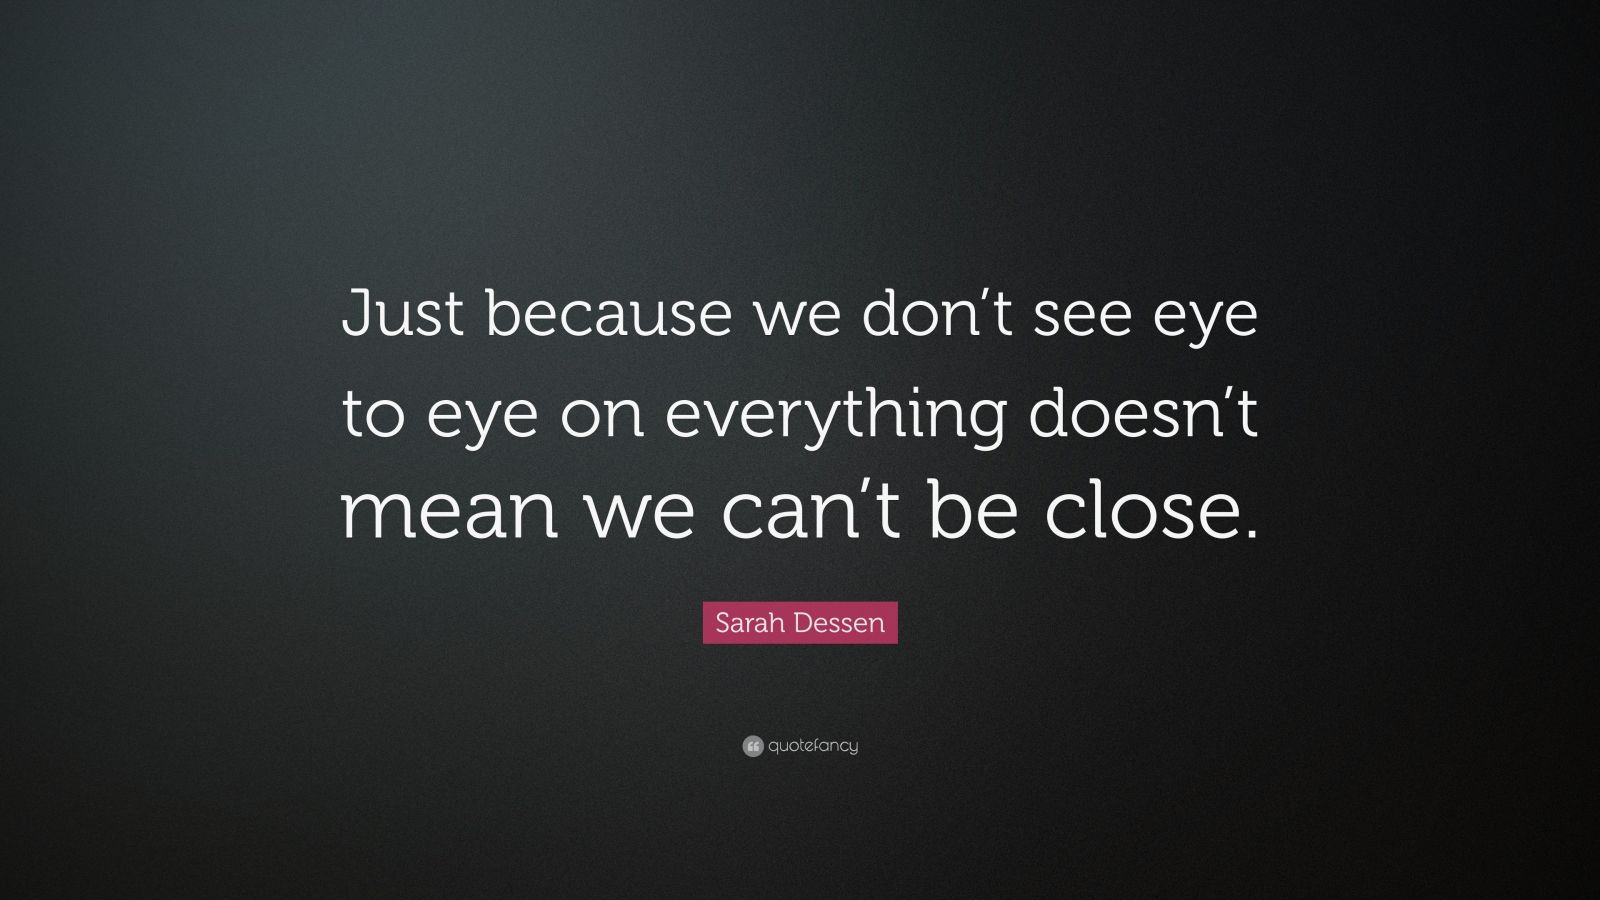 Sarah Dessen Quote: “Just because we don’t see eye to eye on everything ...